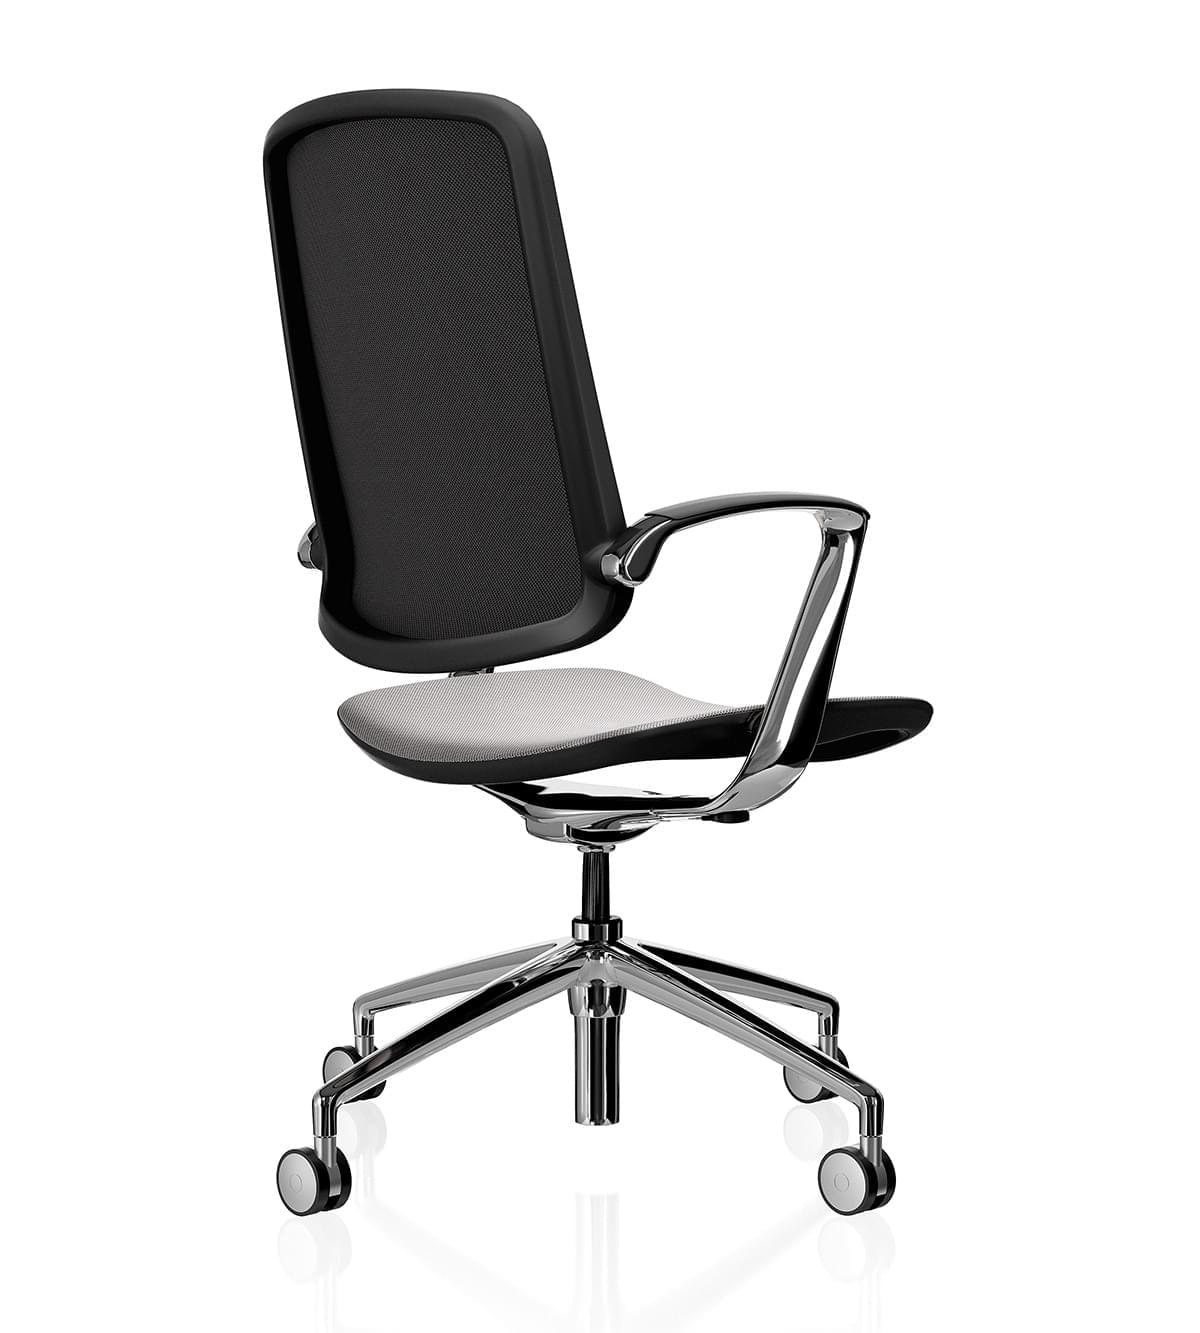 Trinetic Mesh Chair- Black frame polished 4 star base with silver castors